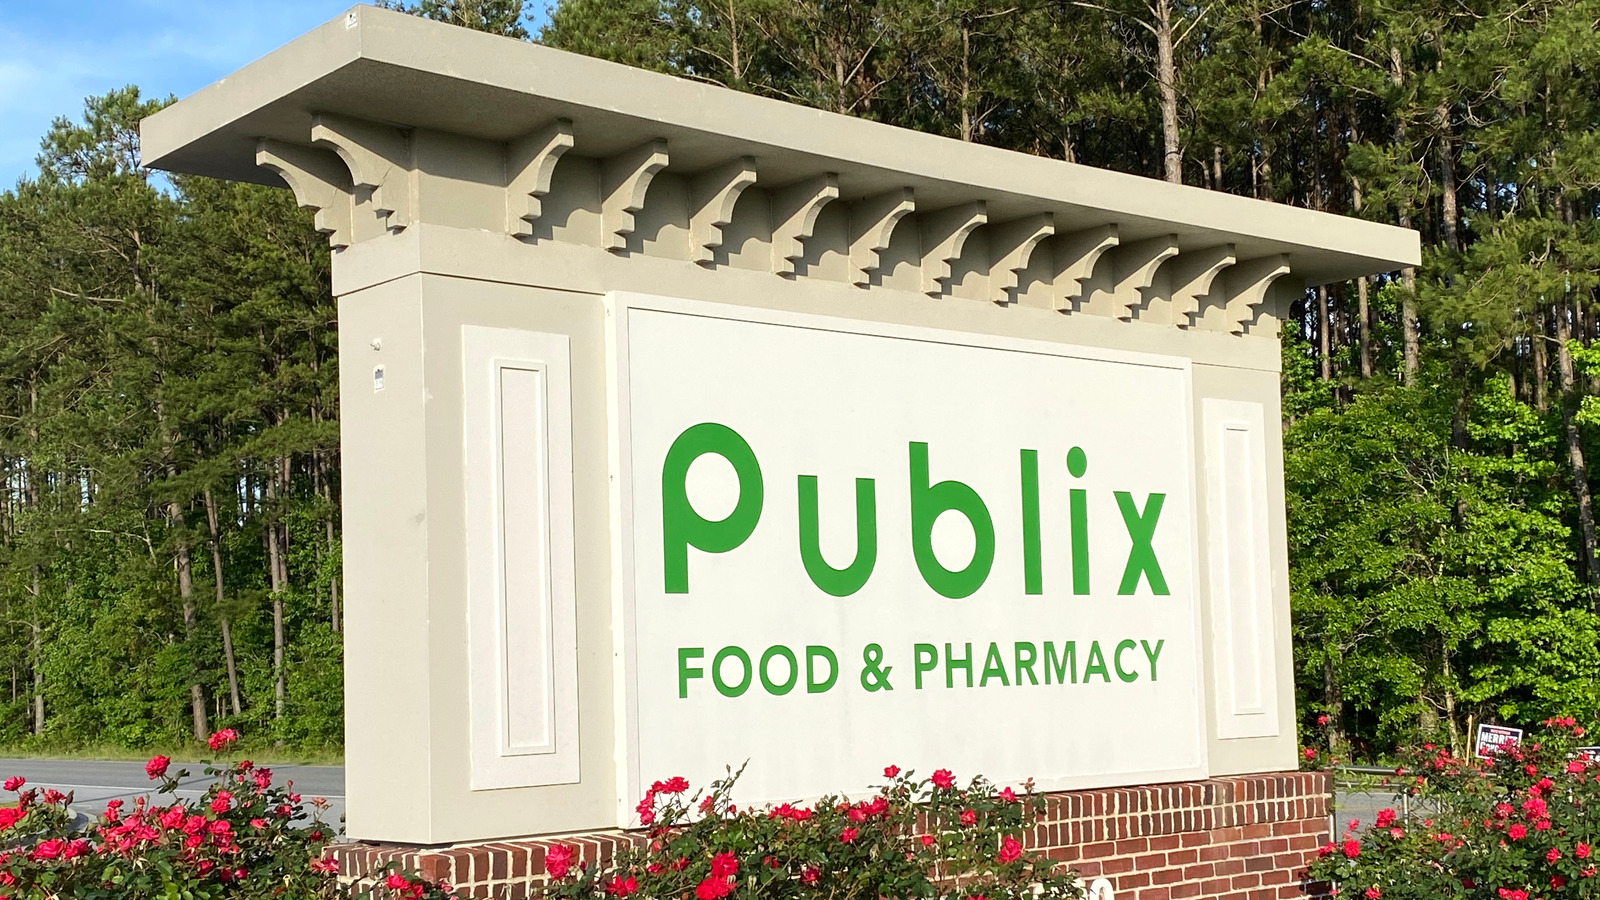 Is Publix Open On New Year's Day 2022?